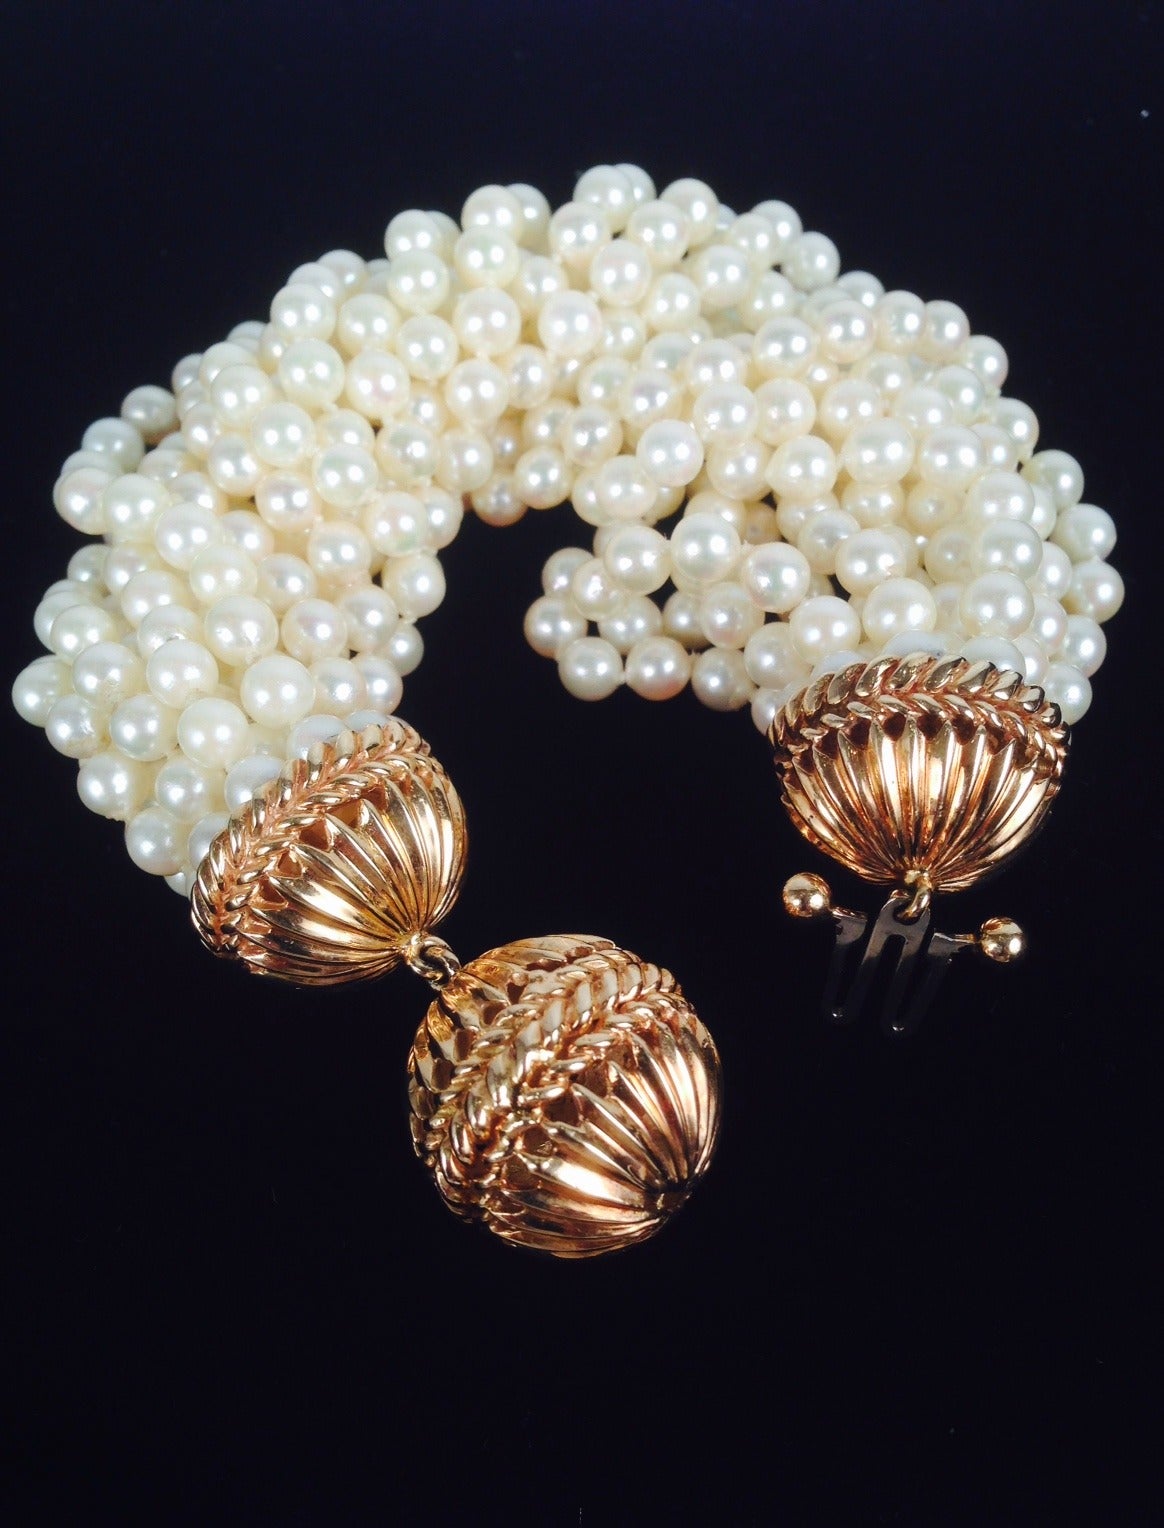 Multi-Strand Pearl Bracelet with Heavy Gold Clasp is classically elegant and fit for a lady!  Bracelet has 12 strands of cultured pearls approximately 5mm and heavy 14 karat yellow gold clasp and end caps.  Bracelet is 9